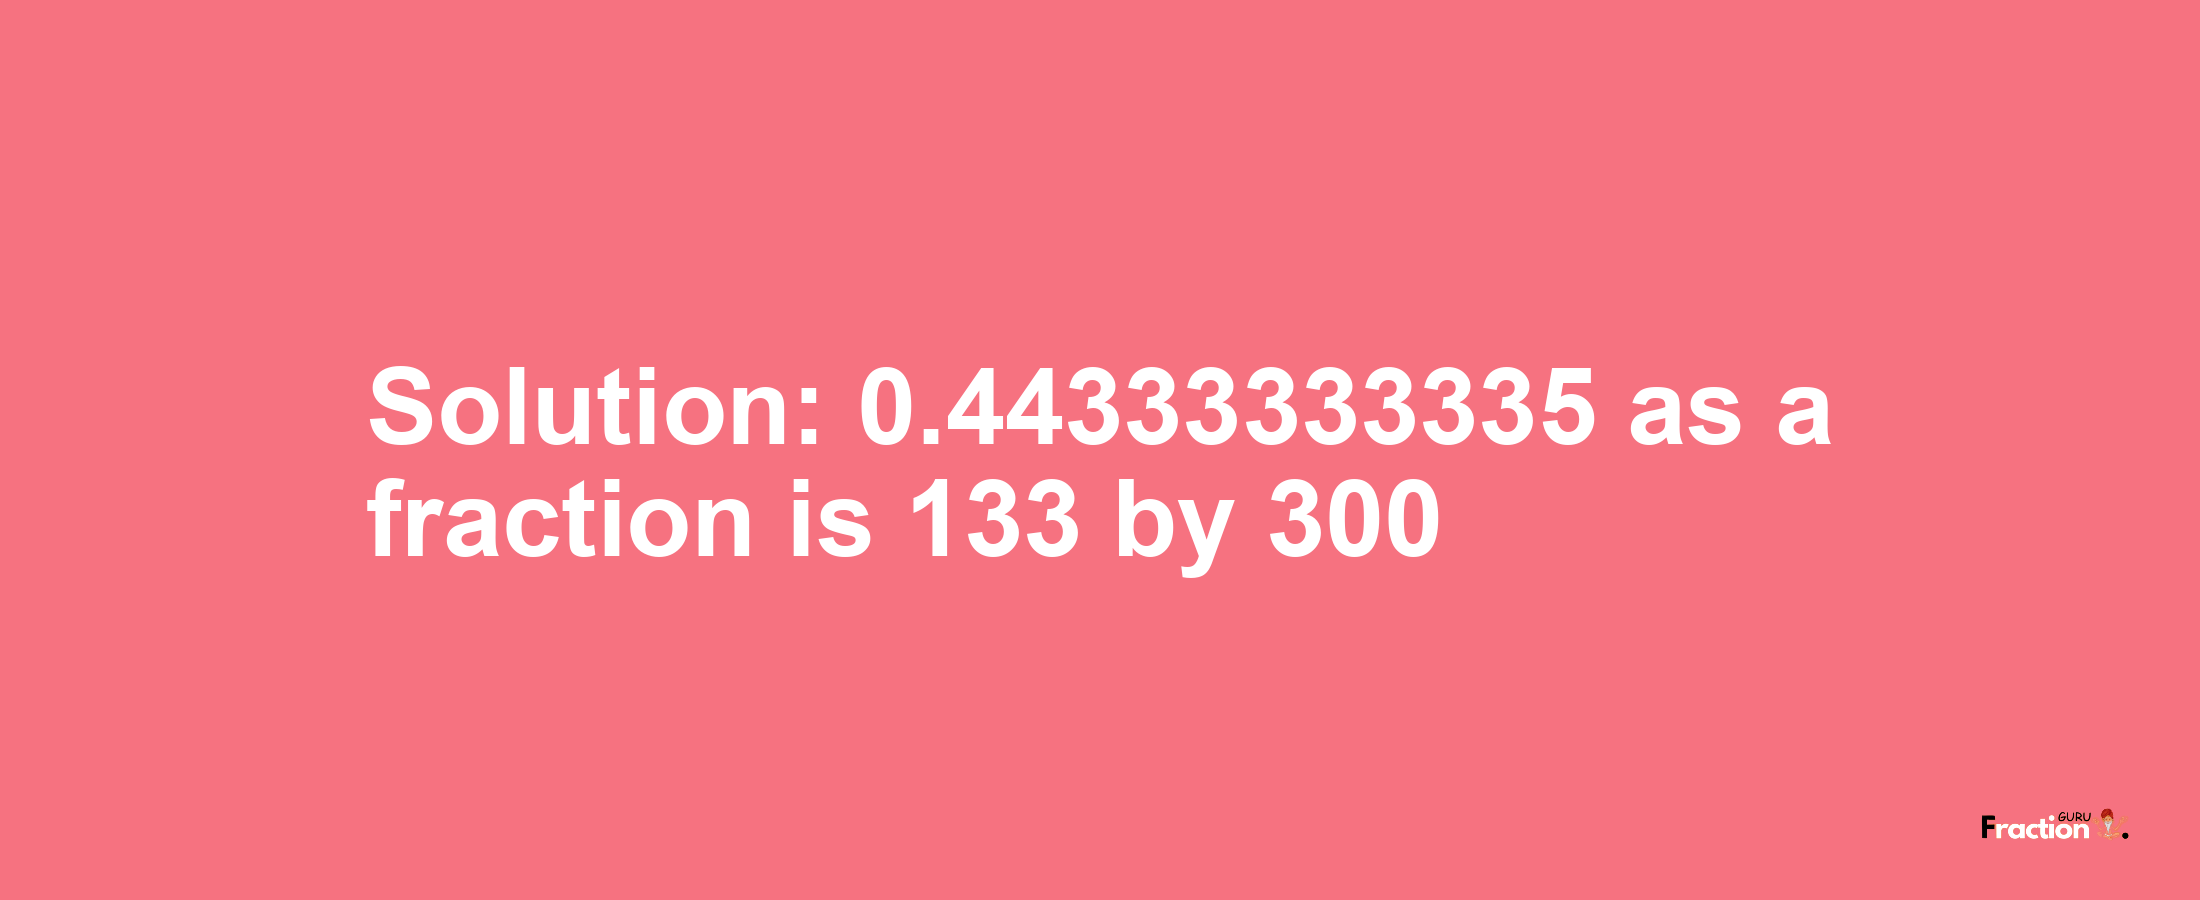 Solution:0.44333333335 as a fraction is 133/300